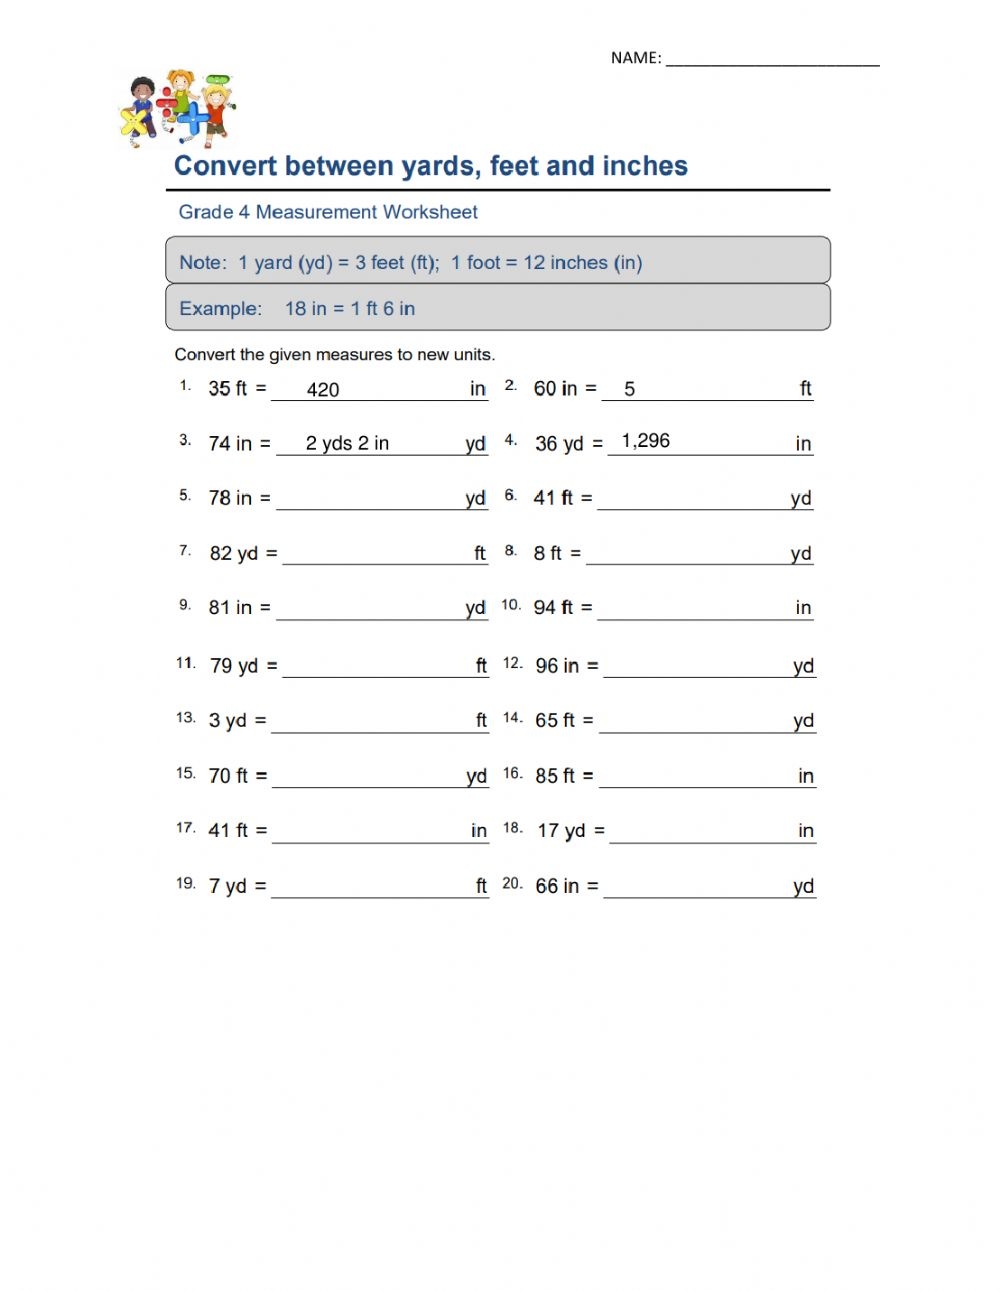 Convert Between Yards Feet And Inches Worksheet